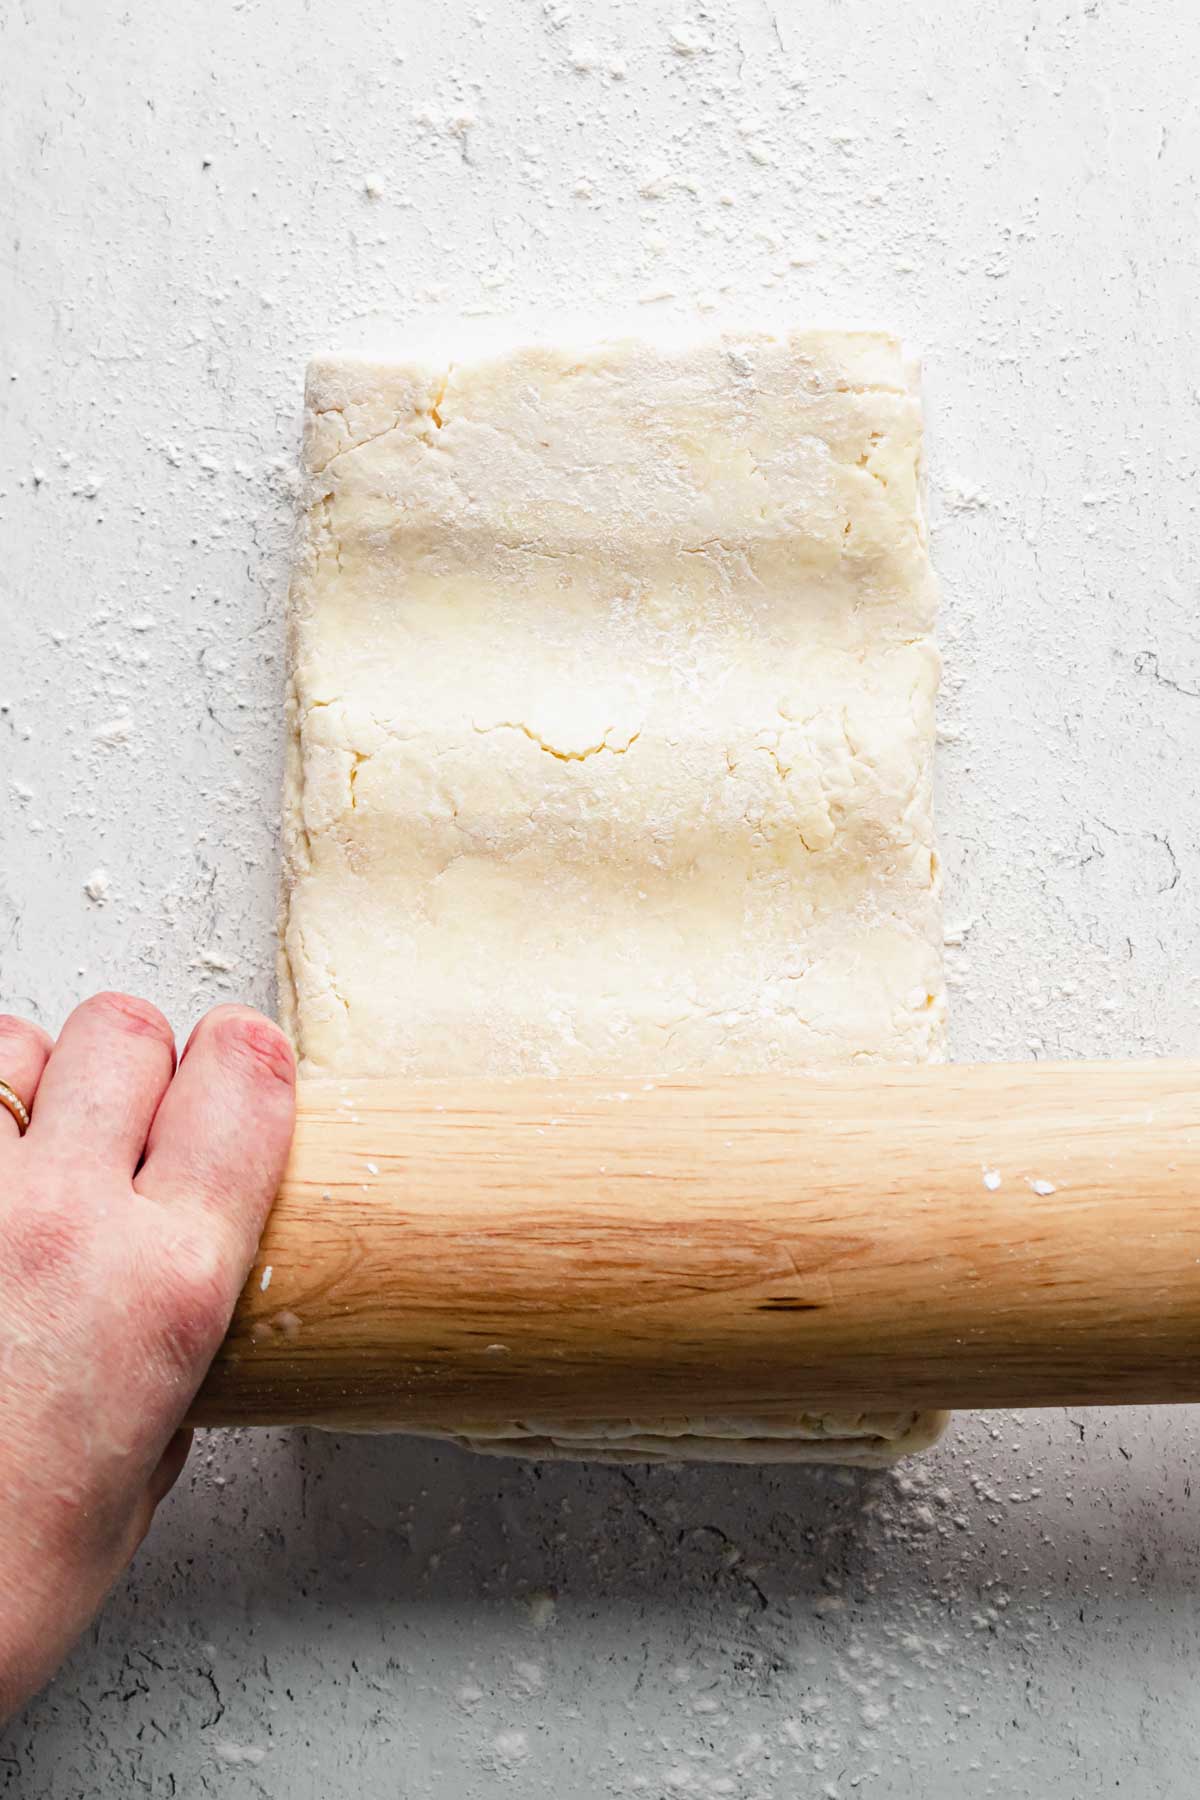 A rolling pin makes indents into the dough before rolling.